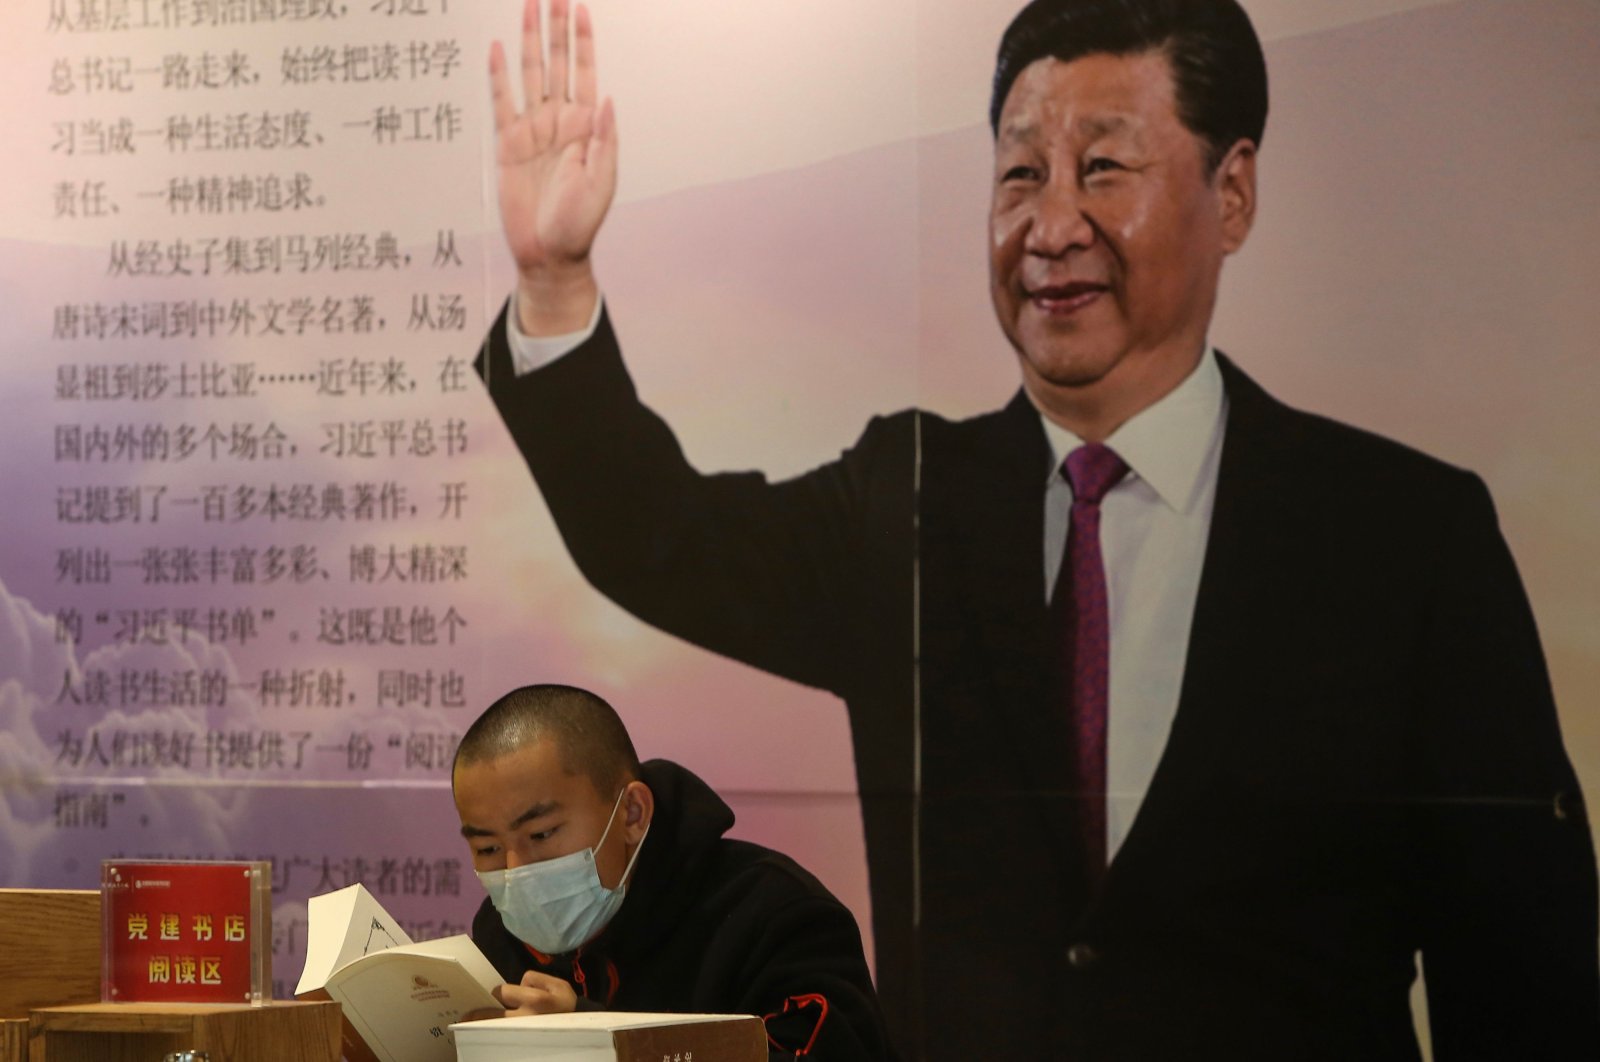 A man reads a book in front of a board with an image of China's President Xi Jinping at a book store during World Book Day in Shenyang in China's northeastern Liaoning province on April 23, 2020. (AFP Photo)